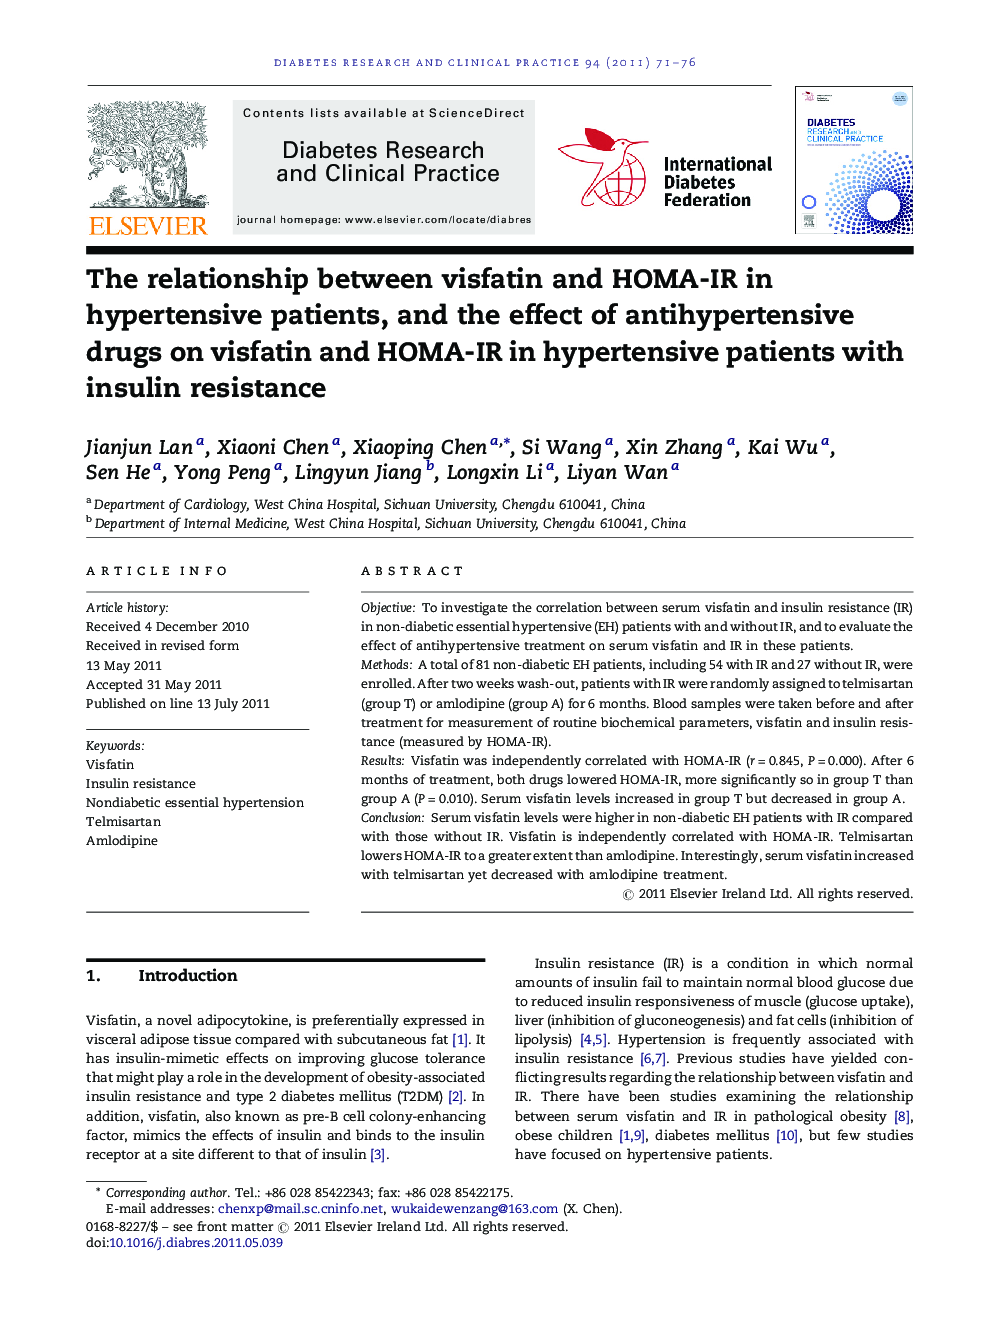 The relationship between visfatin and HOMA-IR in hypertensive patients, and the effect of antihypertensive drugs on visfatin and HOMA-IR in hypertensive patients with insulin resistance